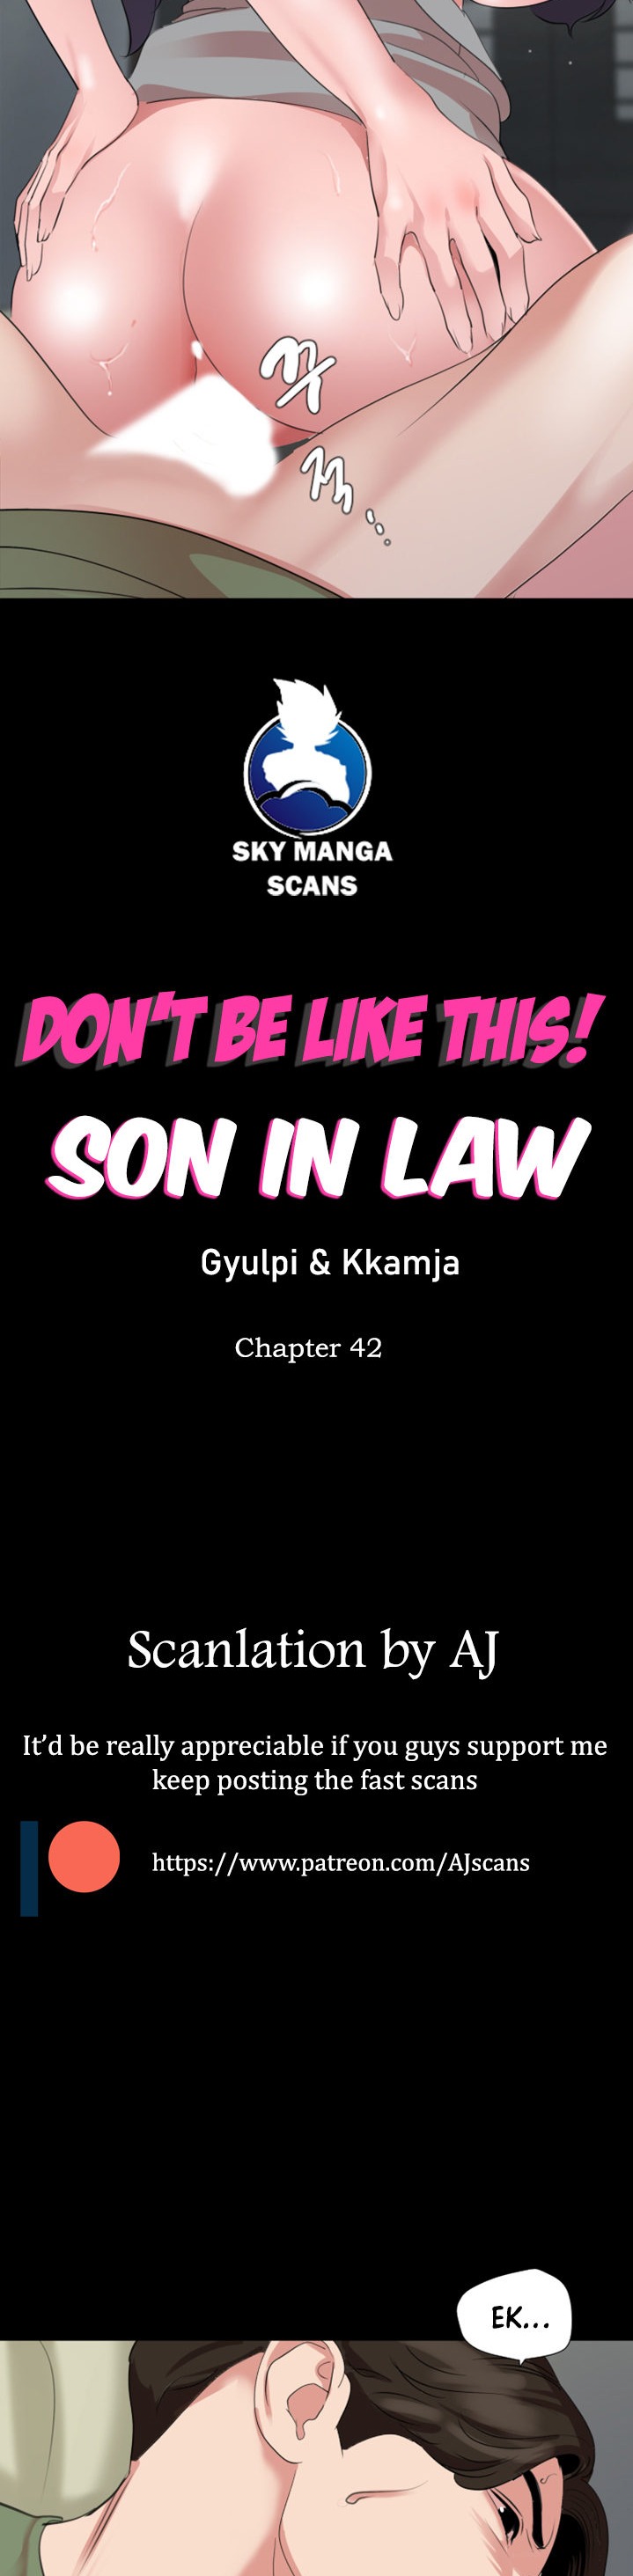 Don’t Be Like This! Son-In-Law - Chapter 42 Page 2